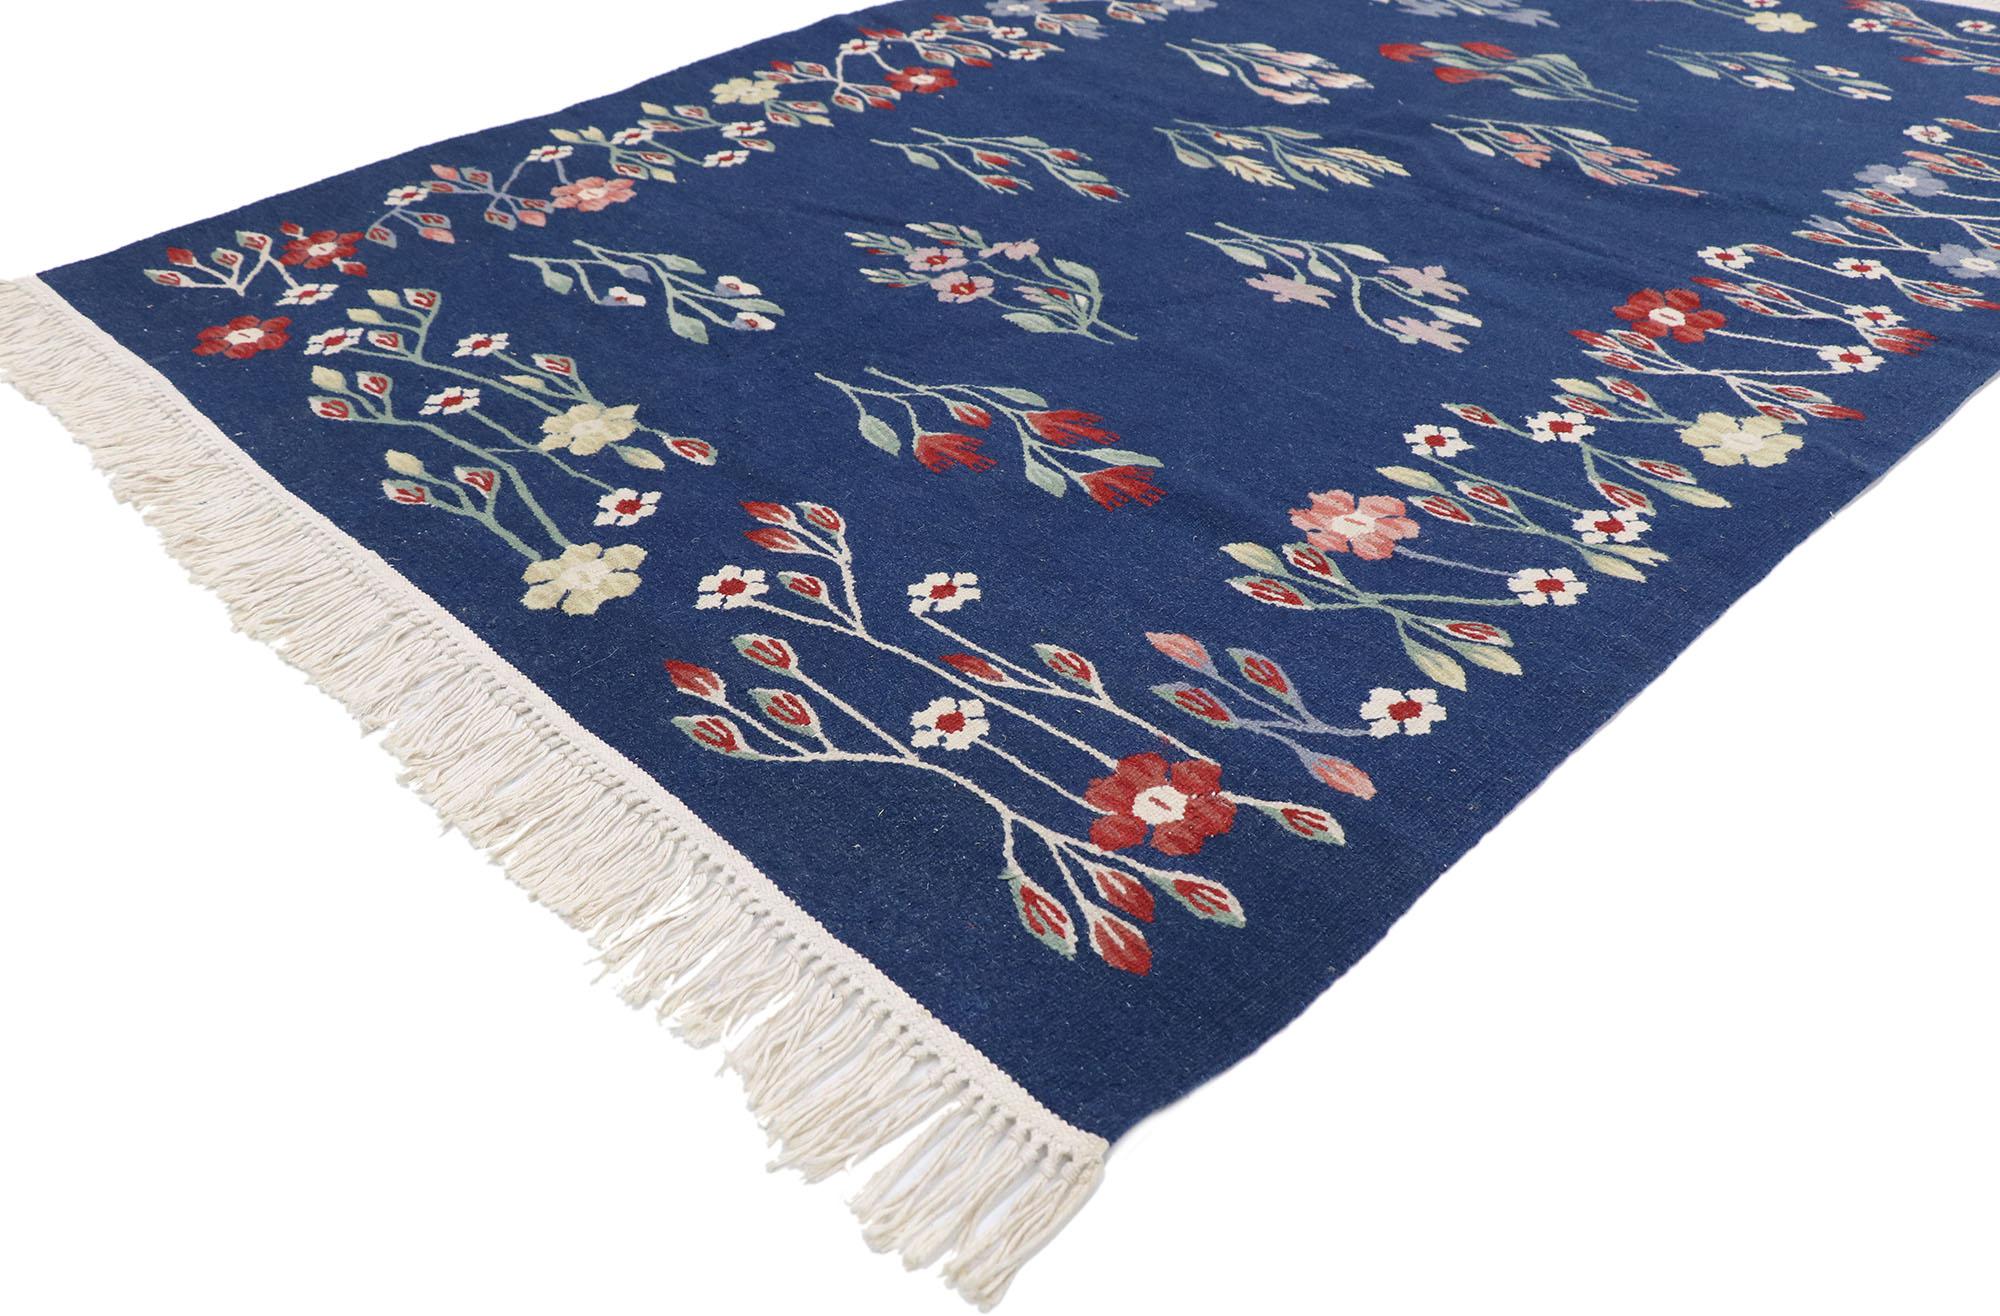 78031 Vintage Romanian Bessarabian Floral Kilim rug with Folk Art Cottage 04'02 x 06'00. Delicately feminine and beautifully traditional, this hand-woven wool vintage Romanian floral kilim rug is poised to impress. The navy blue abrashed field